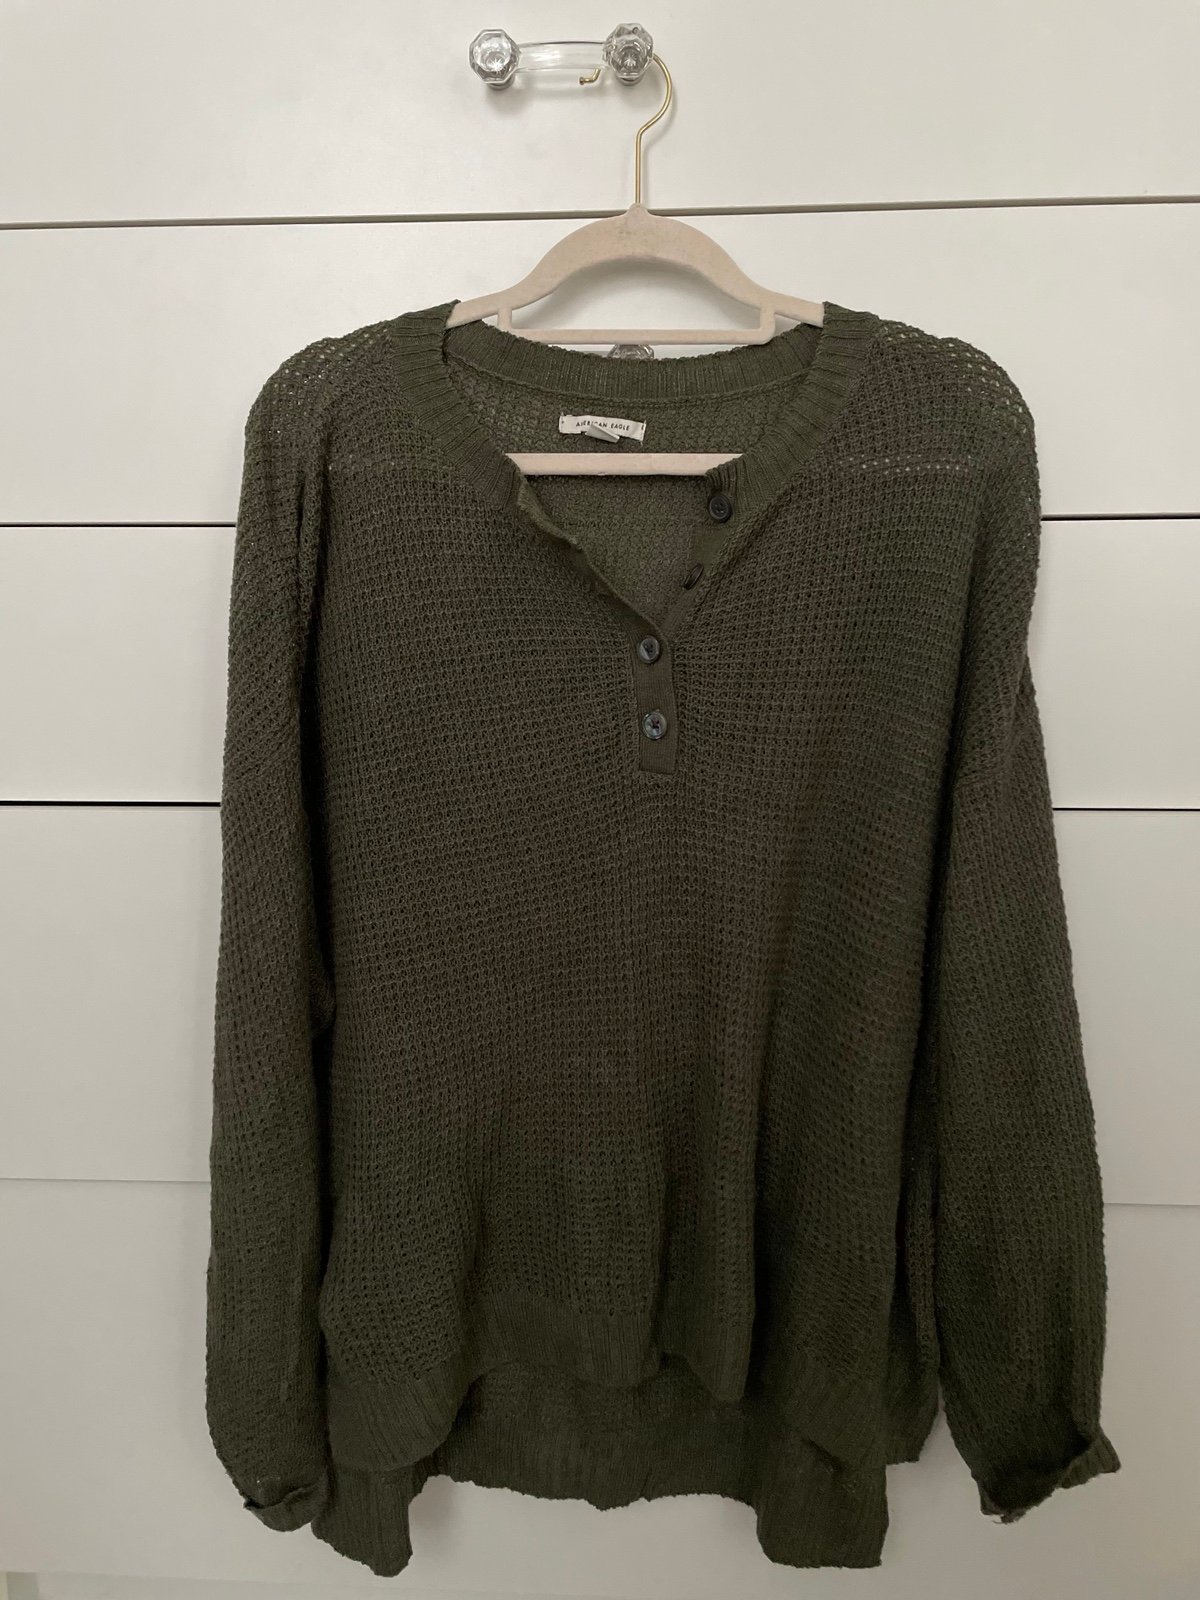 floor price American eagle henley Sweater fnTbeS0or Hig